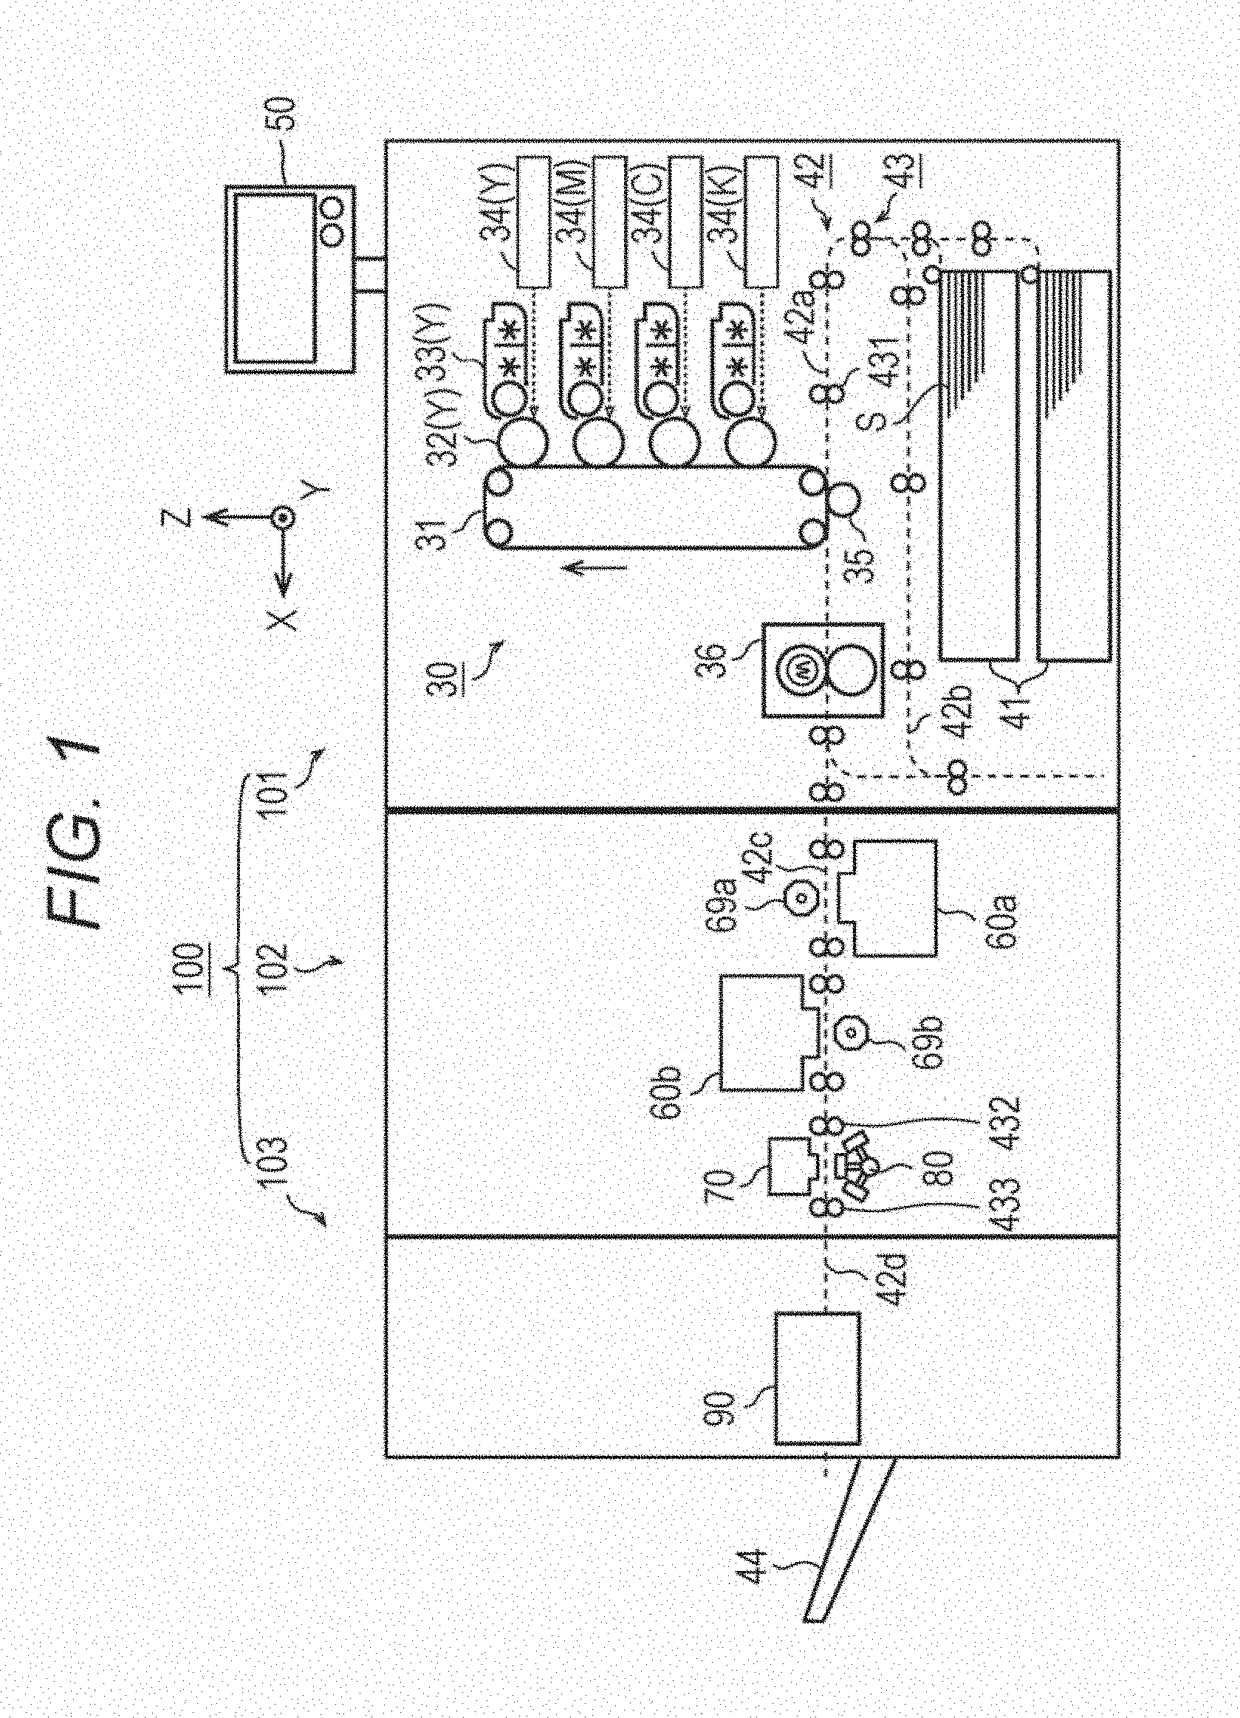 Image reading apparatus, image forming system, and program for image reading apparatus